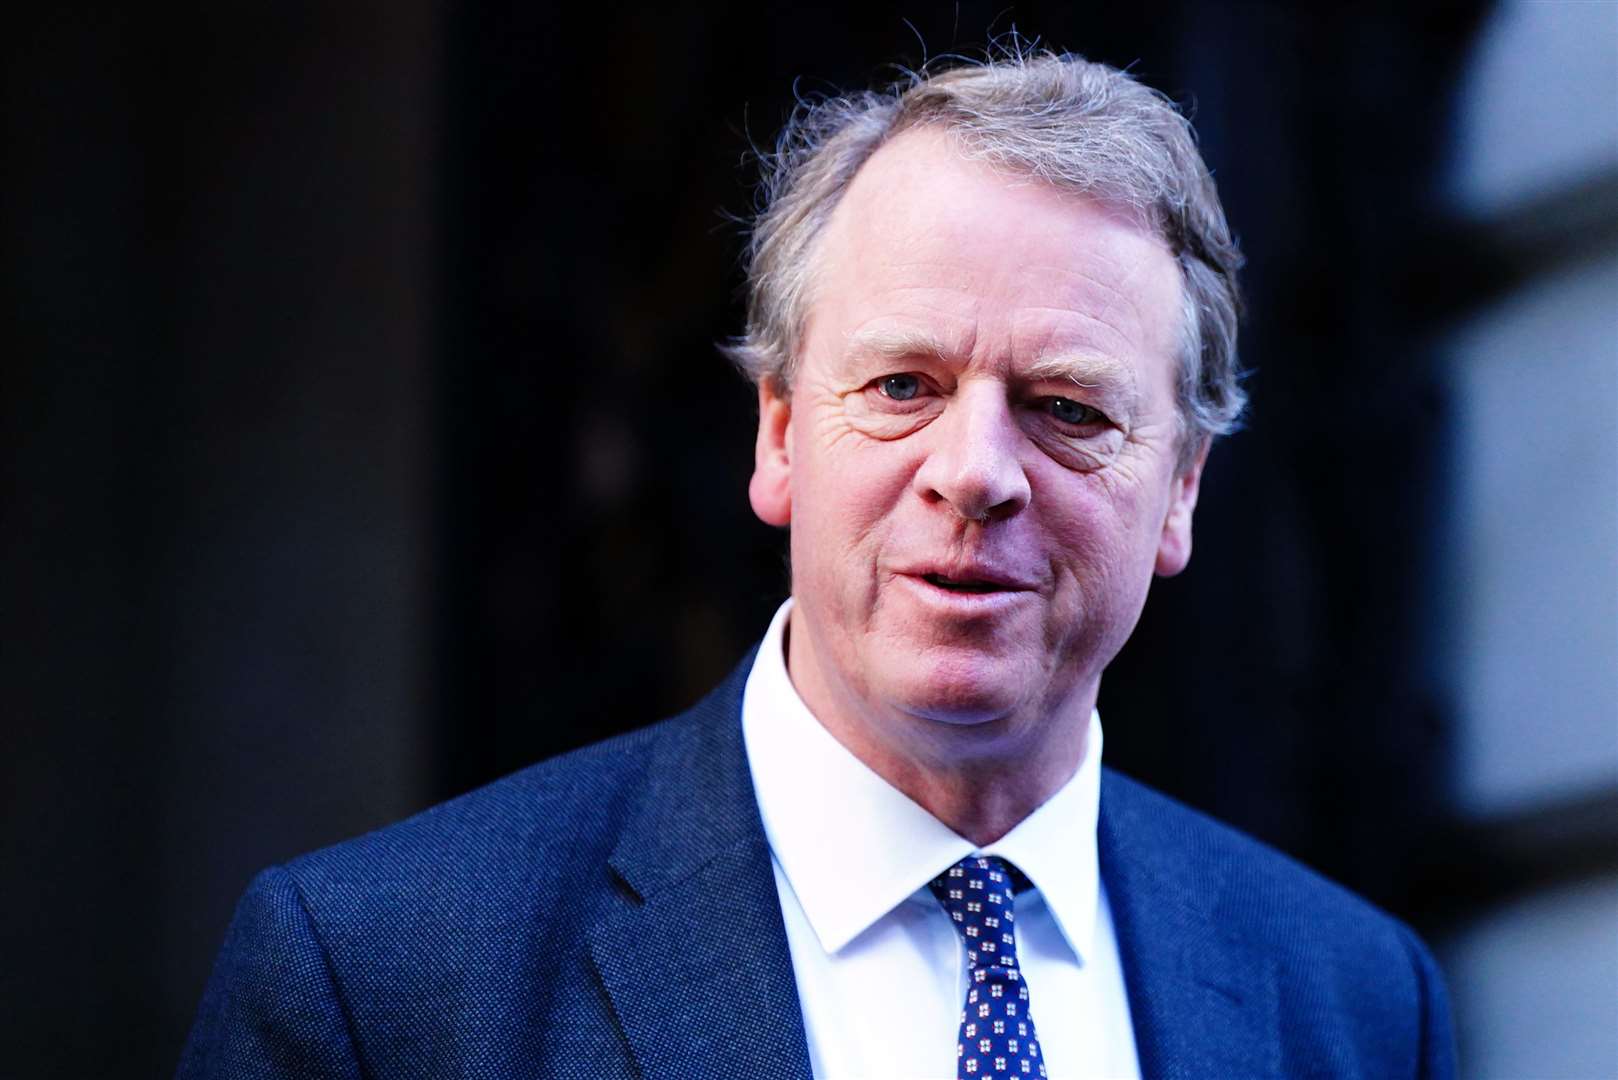 Scottish Secretary Alister Jack said he would not be triggering a by-election if awarded a peerage (Victoria Jones/PA)